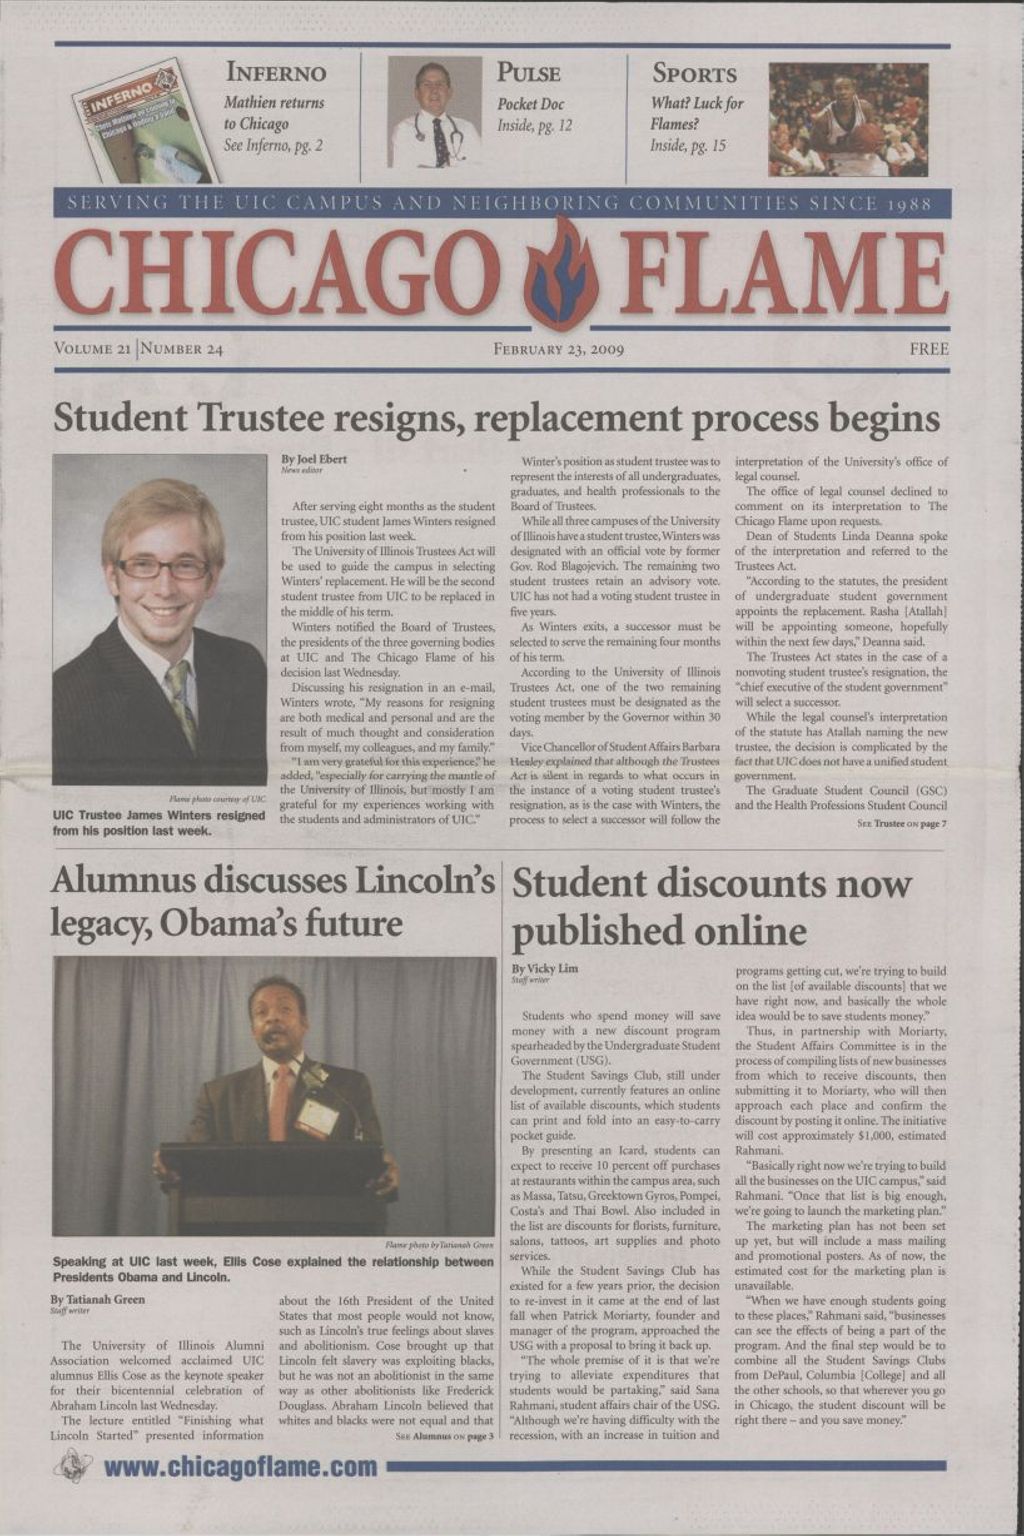 Chicago Flame (February 23, 2009)